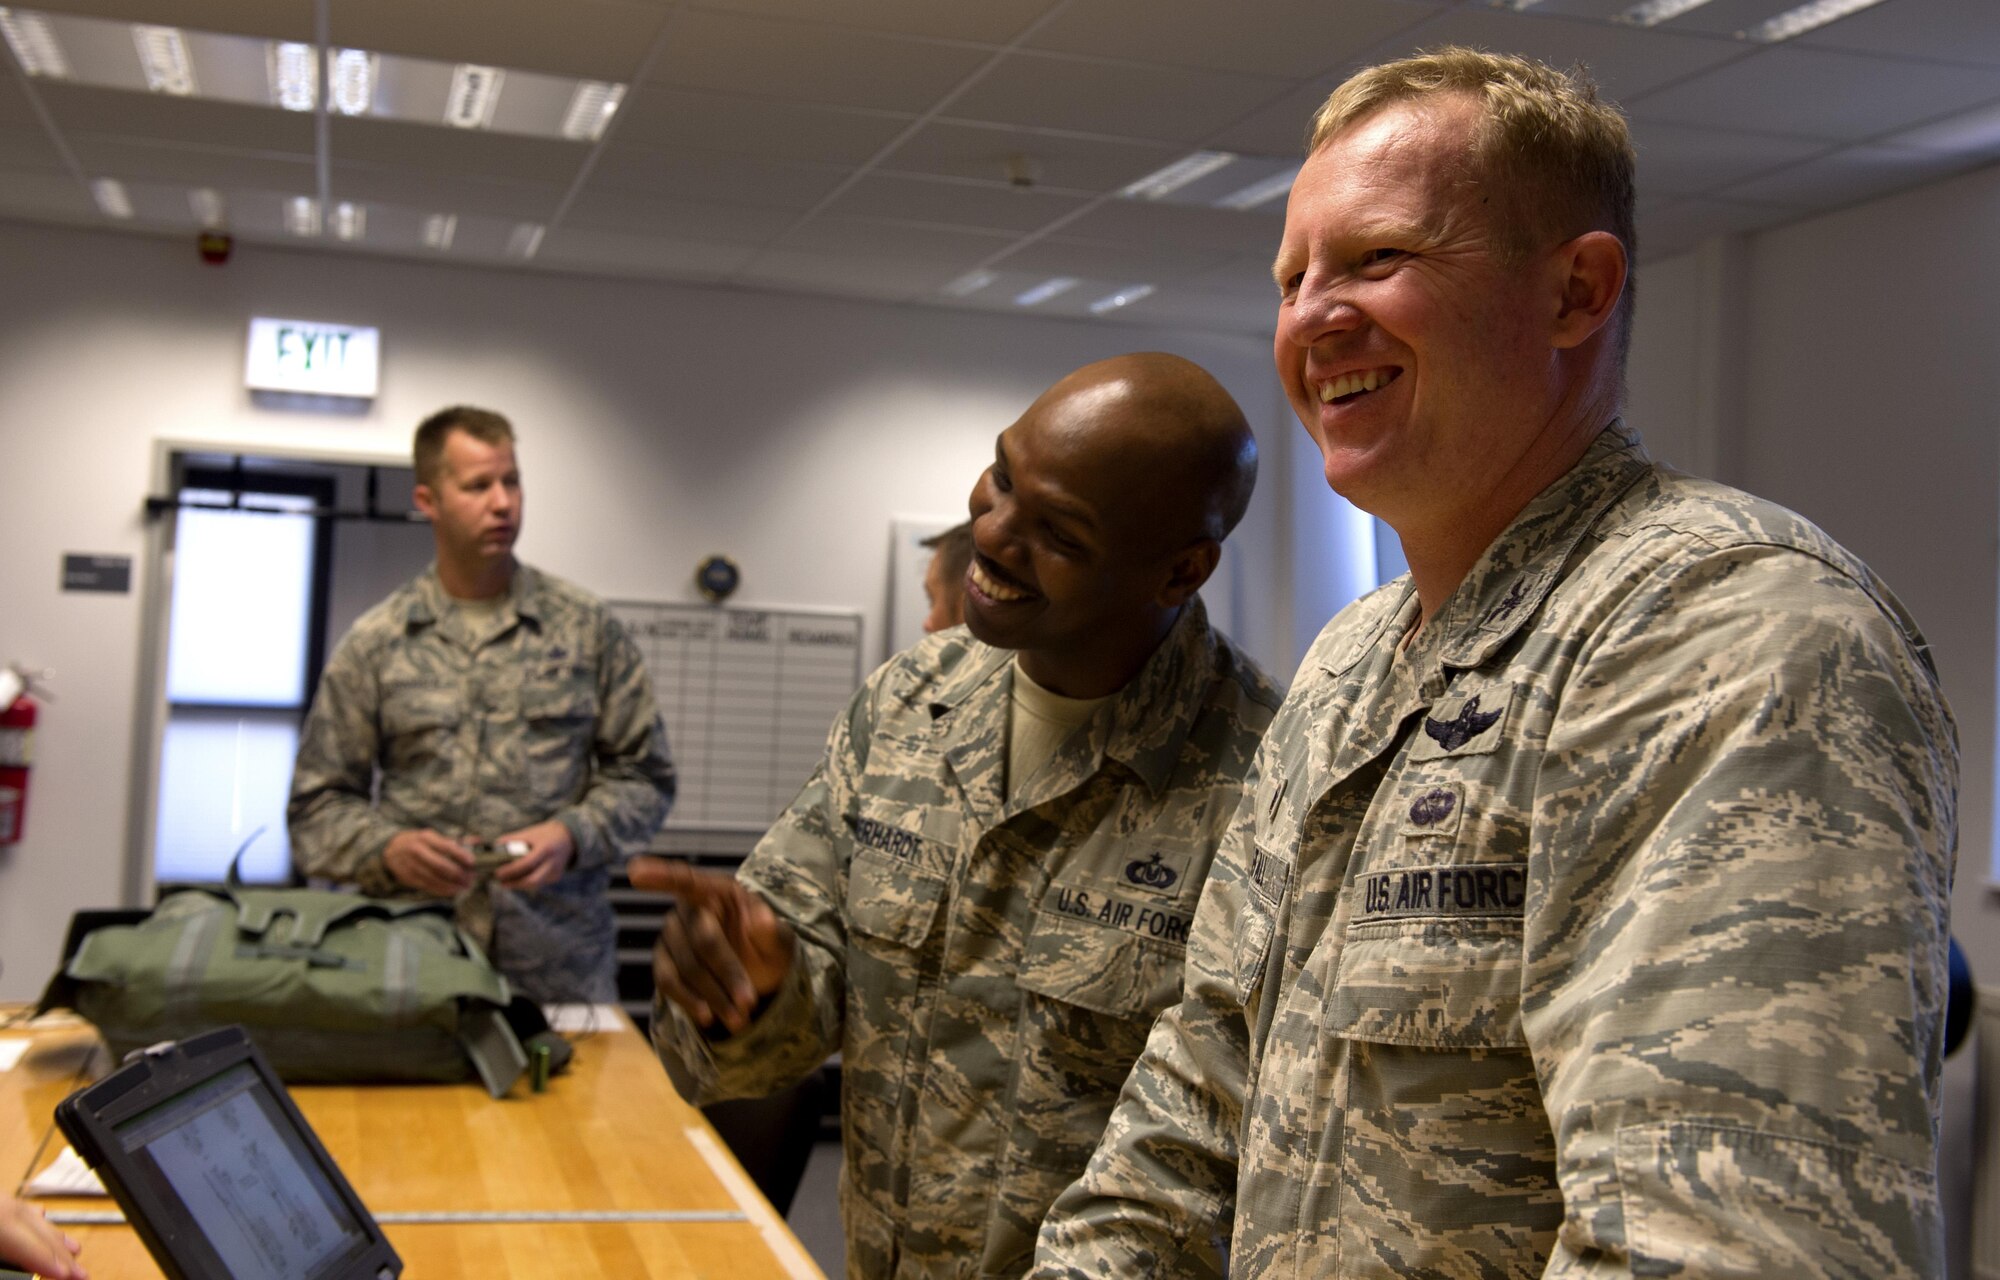 U.S. Air Force Col. Joseph McFall, 52nd Fighter Wing commander, right, and Tech. Sgt. Edward Eberhardt, 52nd Operations Support Squadron aircrew flight equipment flight chief, center, laugh during a Saber leadership “out and about” event at the parachute shop on Spangdahlem Air Base, Germany, Sept. 8, 2016. The event lets the 52nd FW commander and command chief get a hands on experience at Saber work centers in an effort to better understand the duties of Airmen at Spangdahlem. (U.S. Air Force photo by Airman 1st Class Preston Cherry/Released)